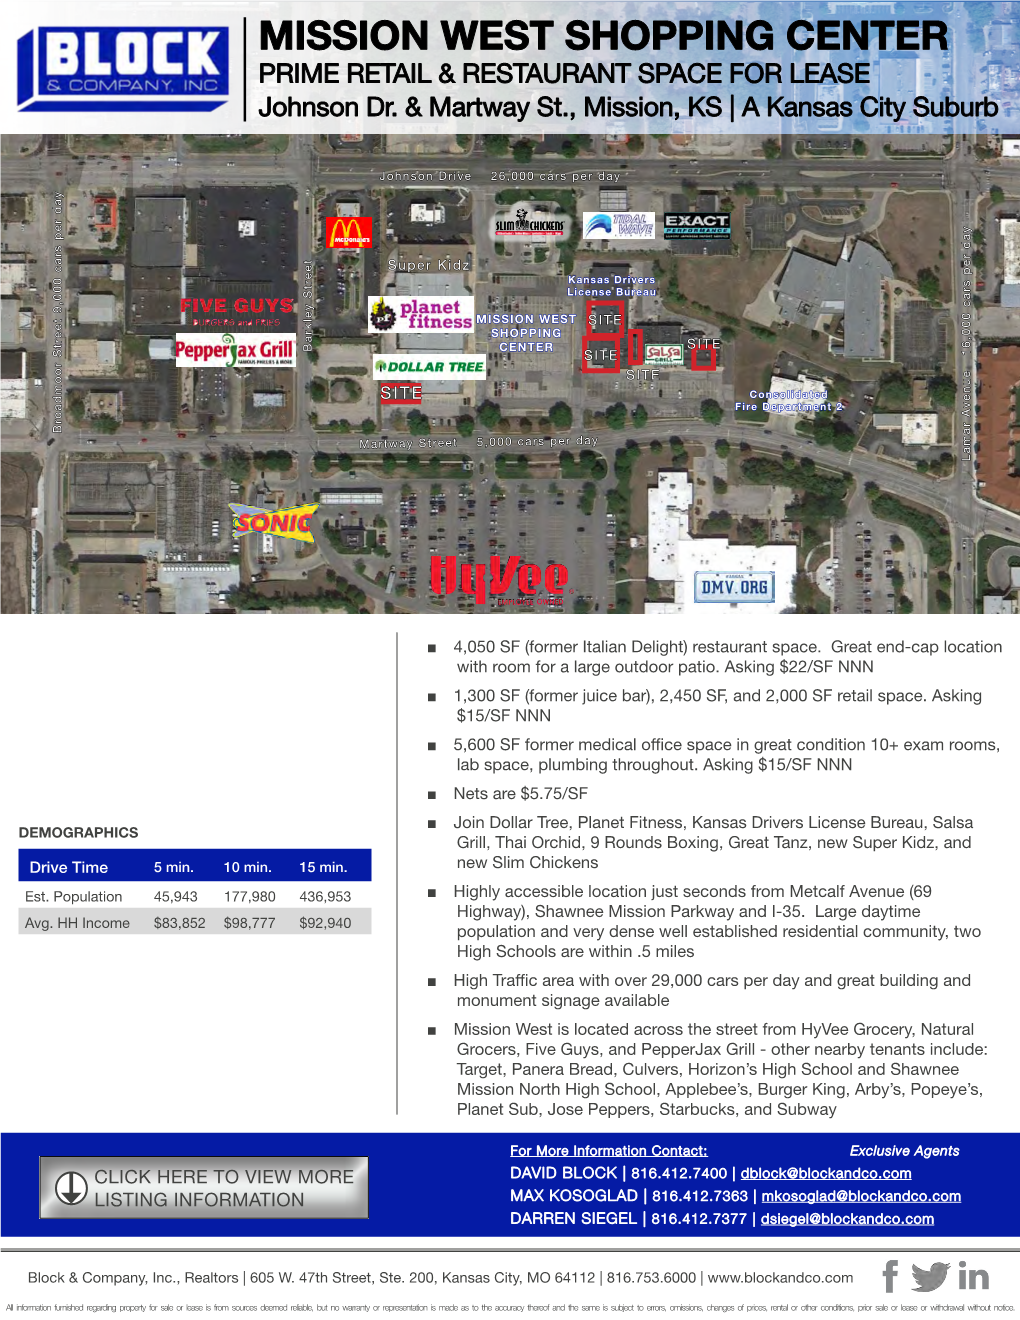 MISSION WEST SHOPPING CENTER PRIME RETAIL & RESTAURANT SPACE for LEASE Johnson Dr